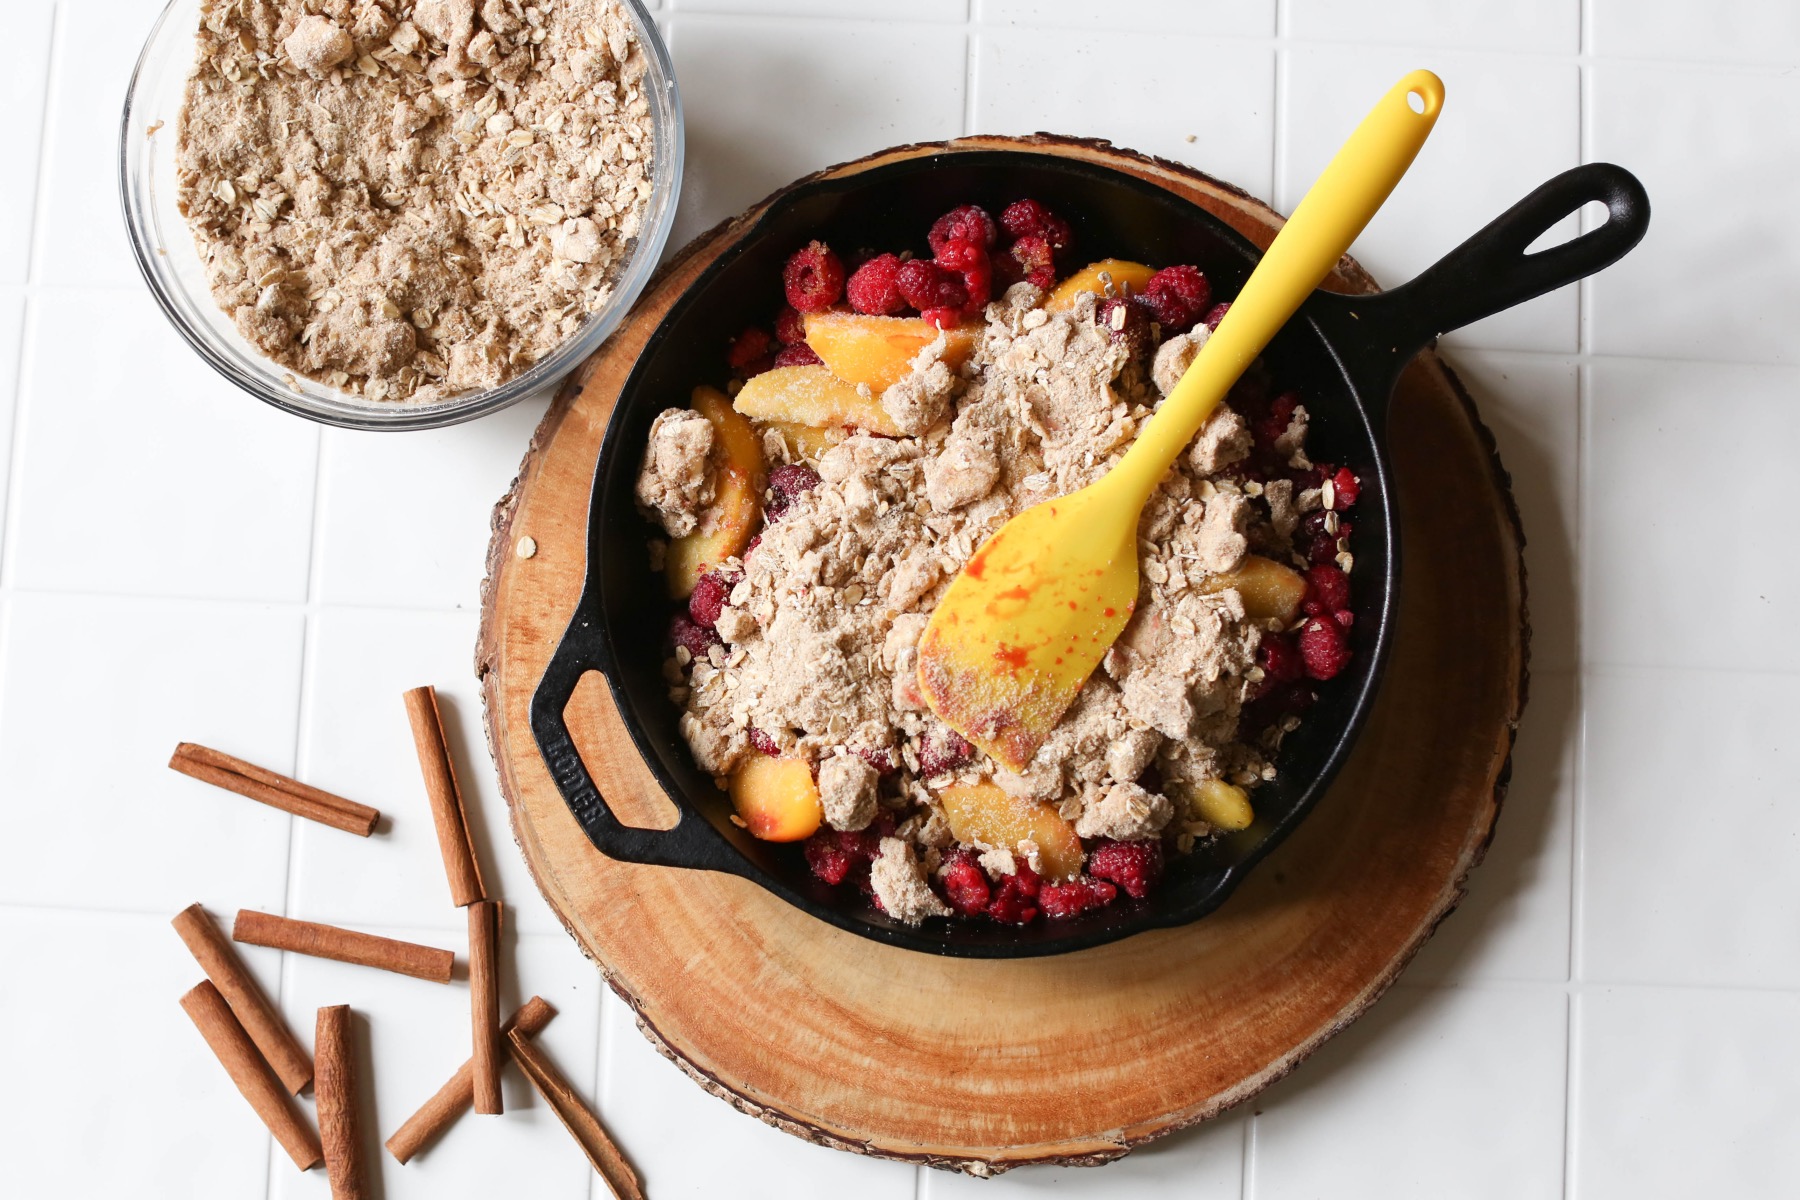 add the crisp topping to the raspberry and peach crisp